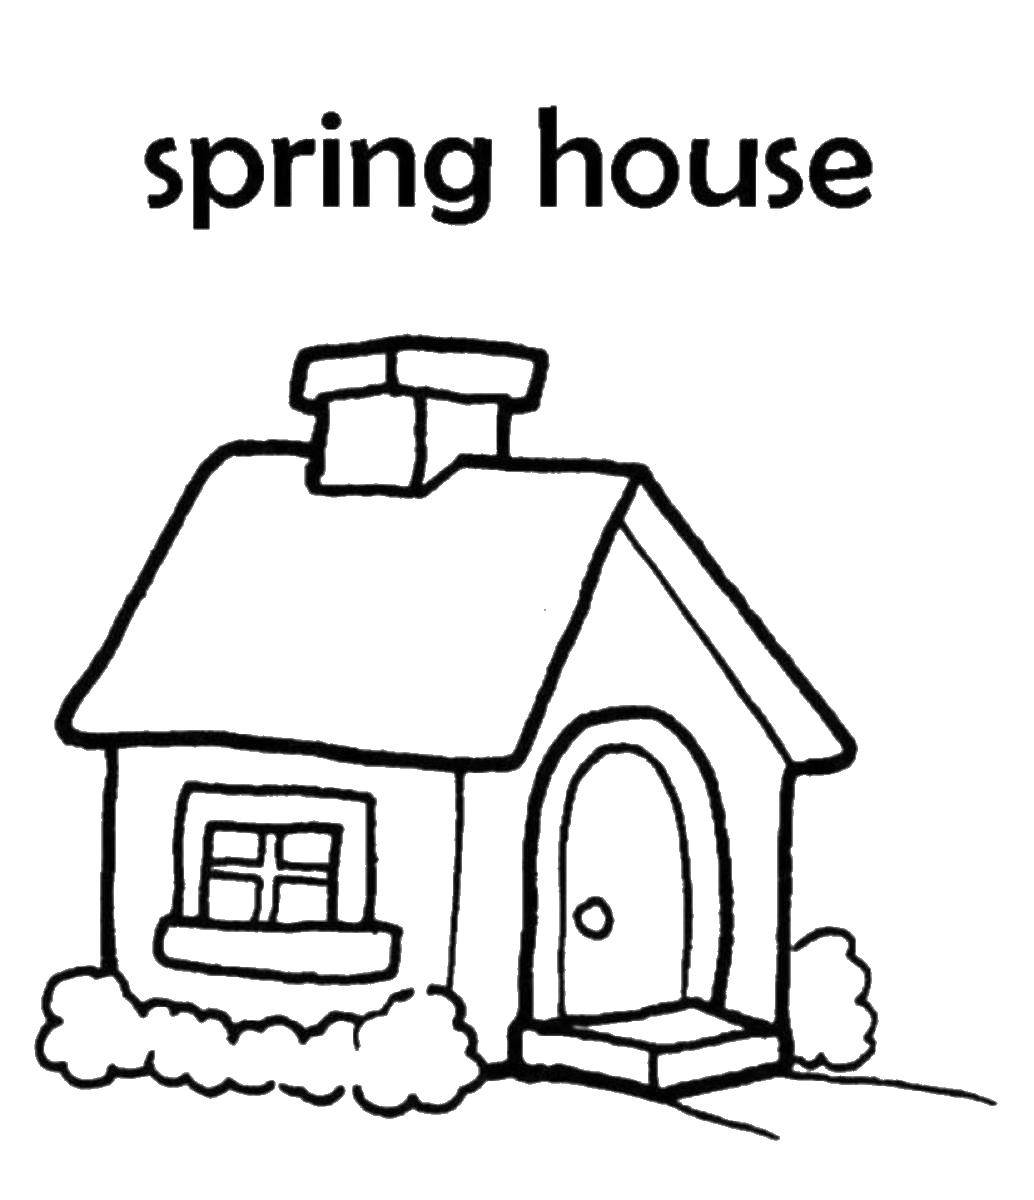 Coloring Spring house. Category Coloring house. Tags:  home, spring.